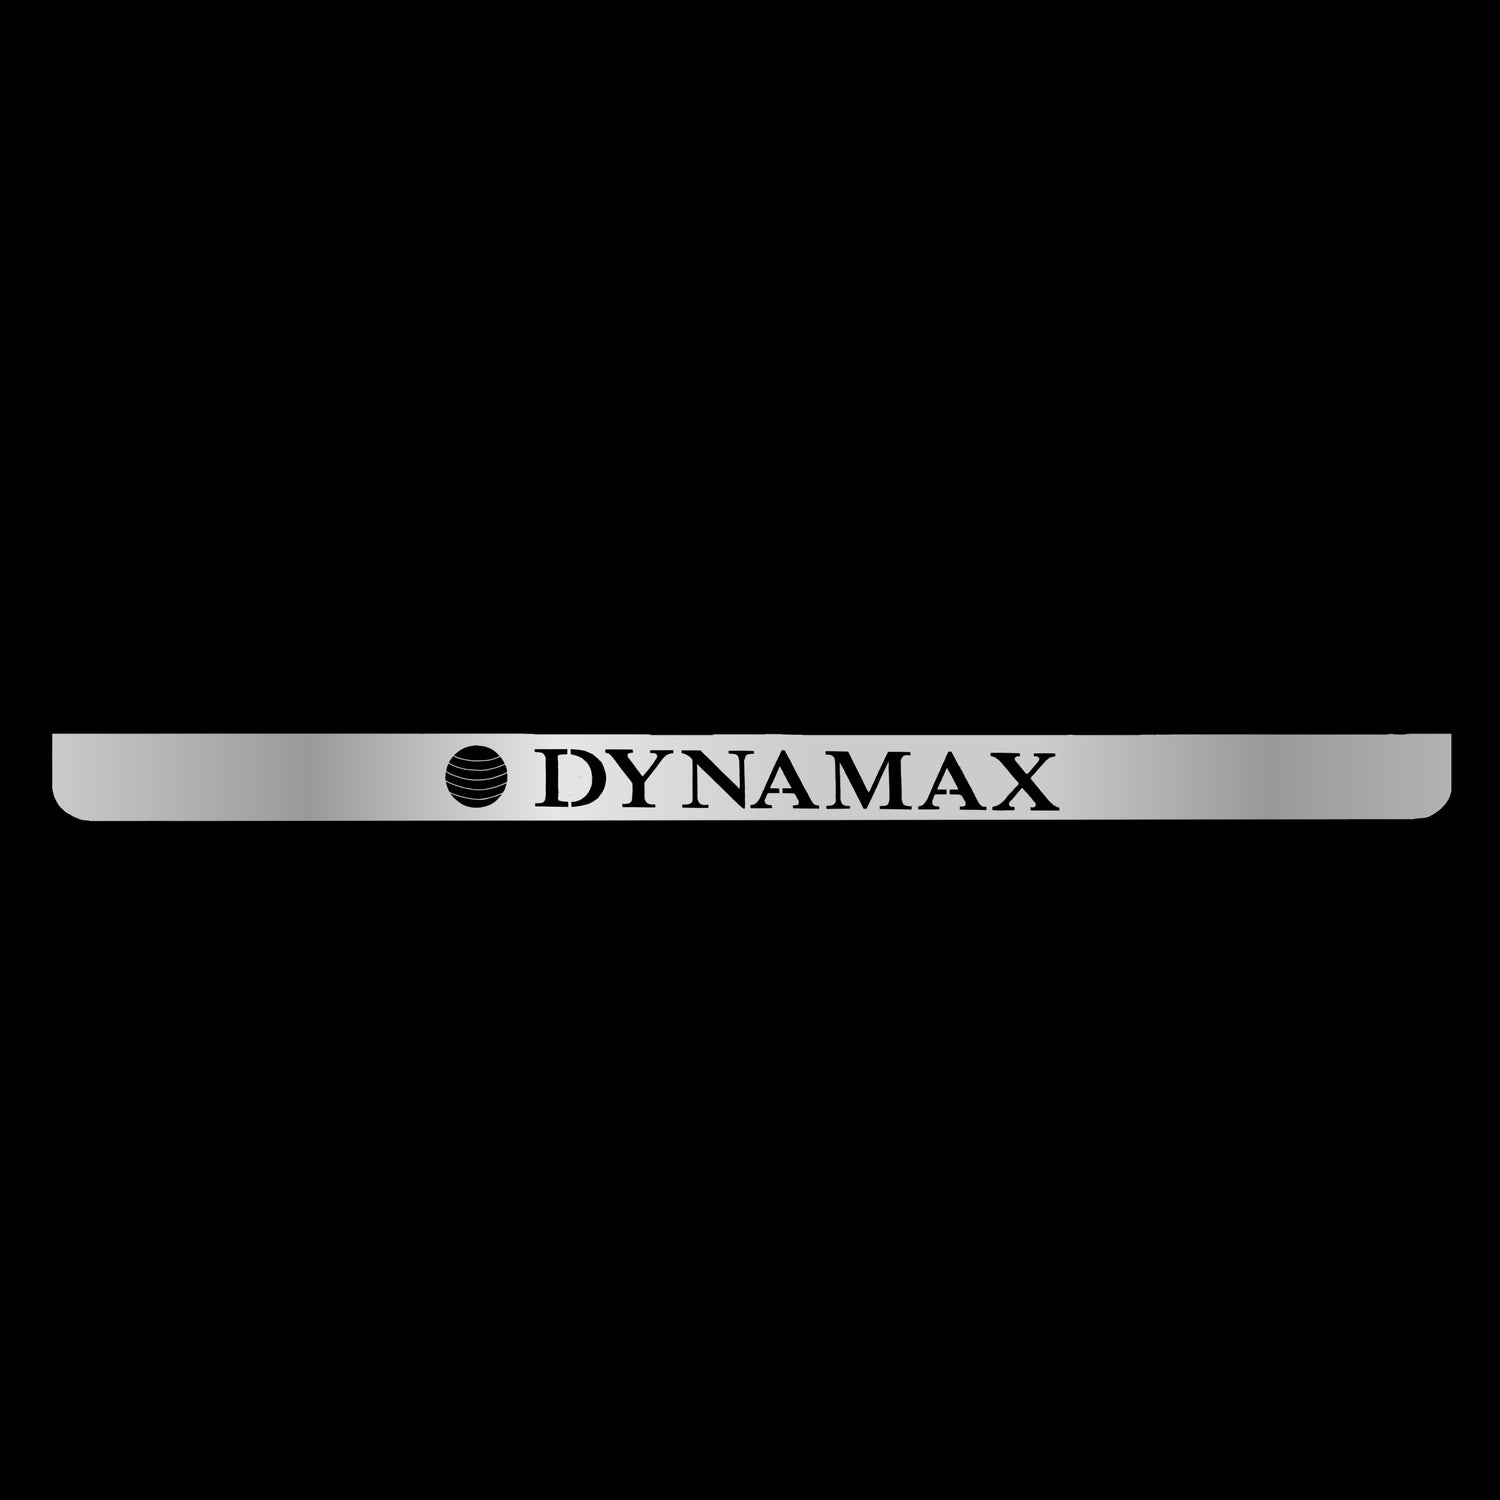 Future-Sales-Dynamax-Face-Plate-stainless-steel-mirror-finish-Height-6-Width-94-backer-plate-SSDYN-L-02M